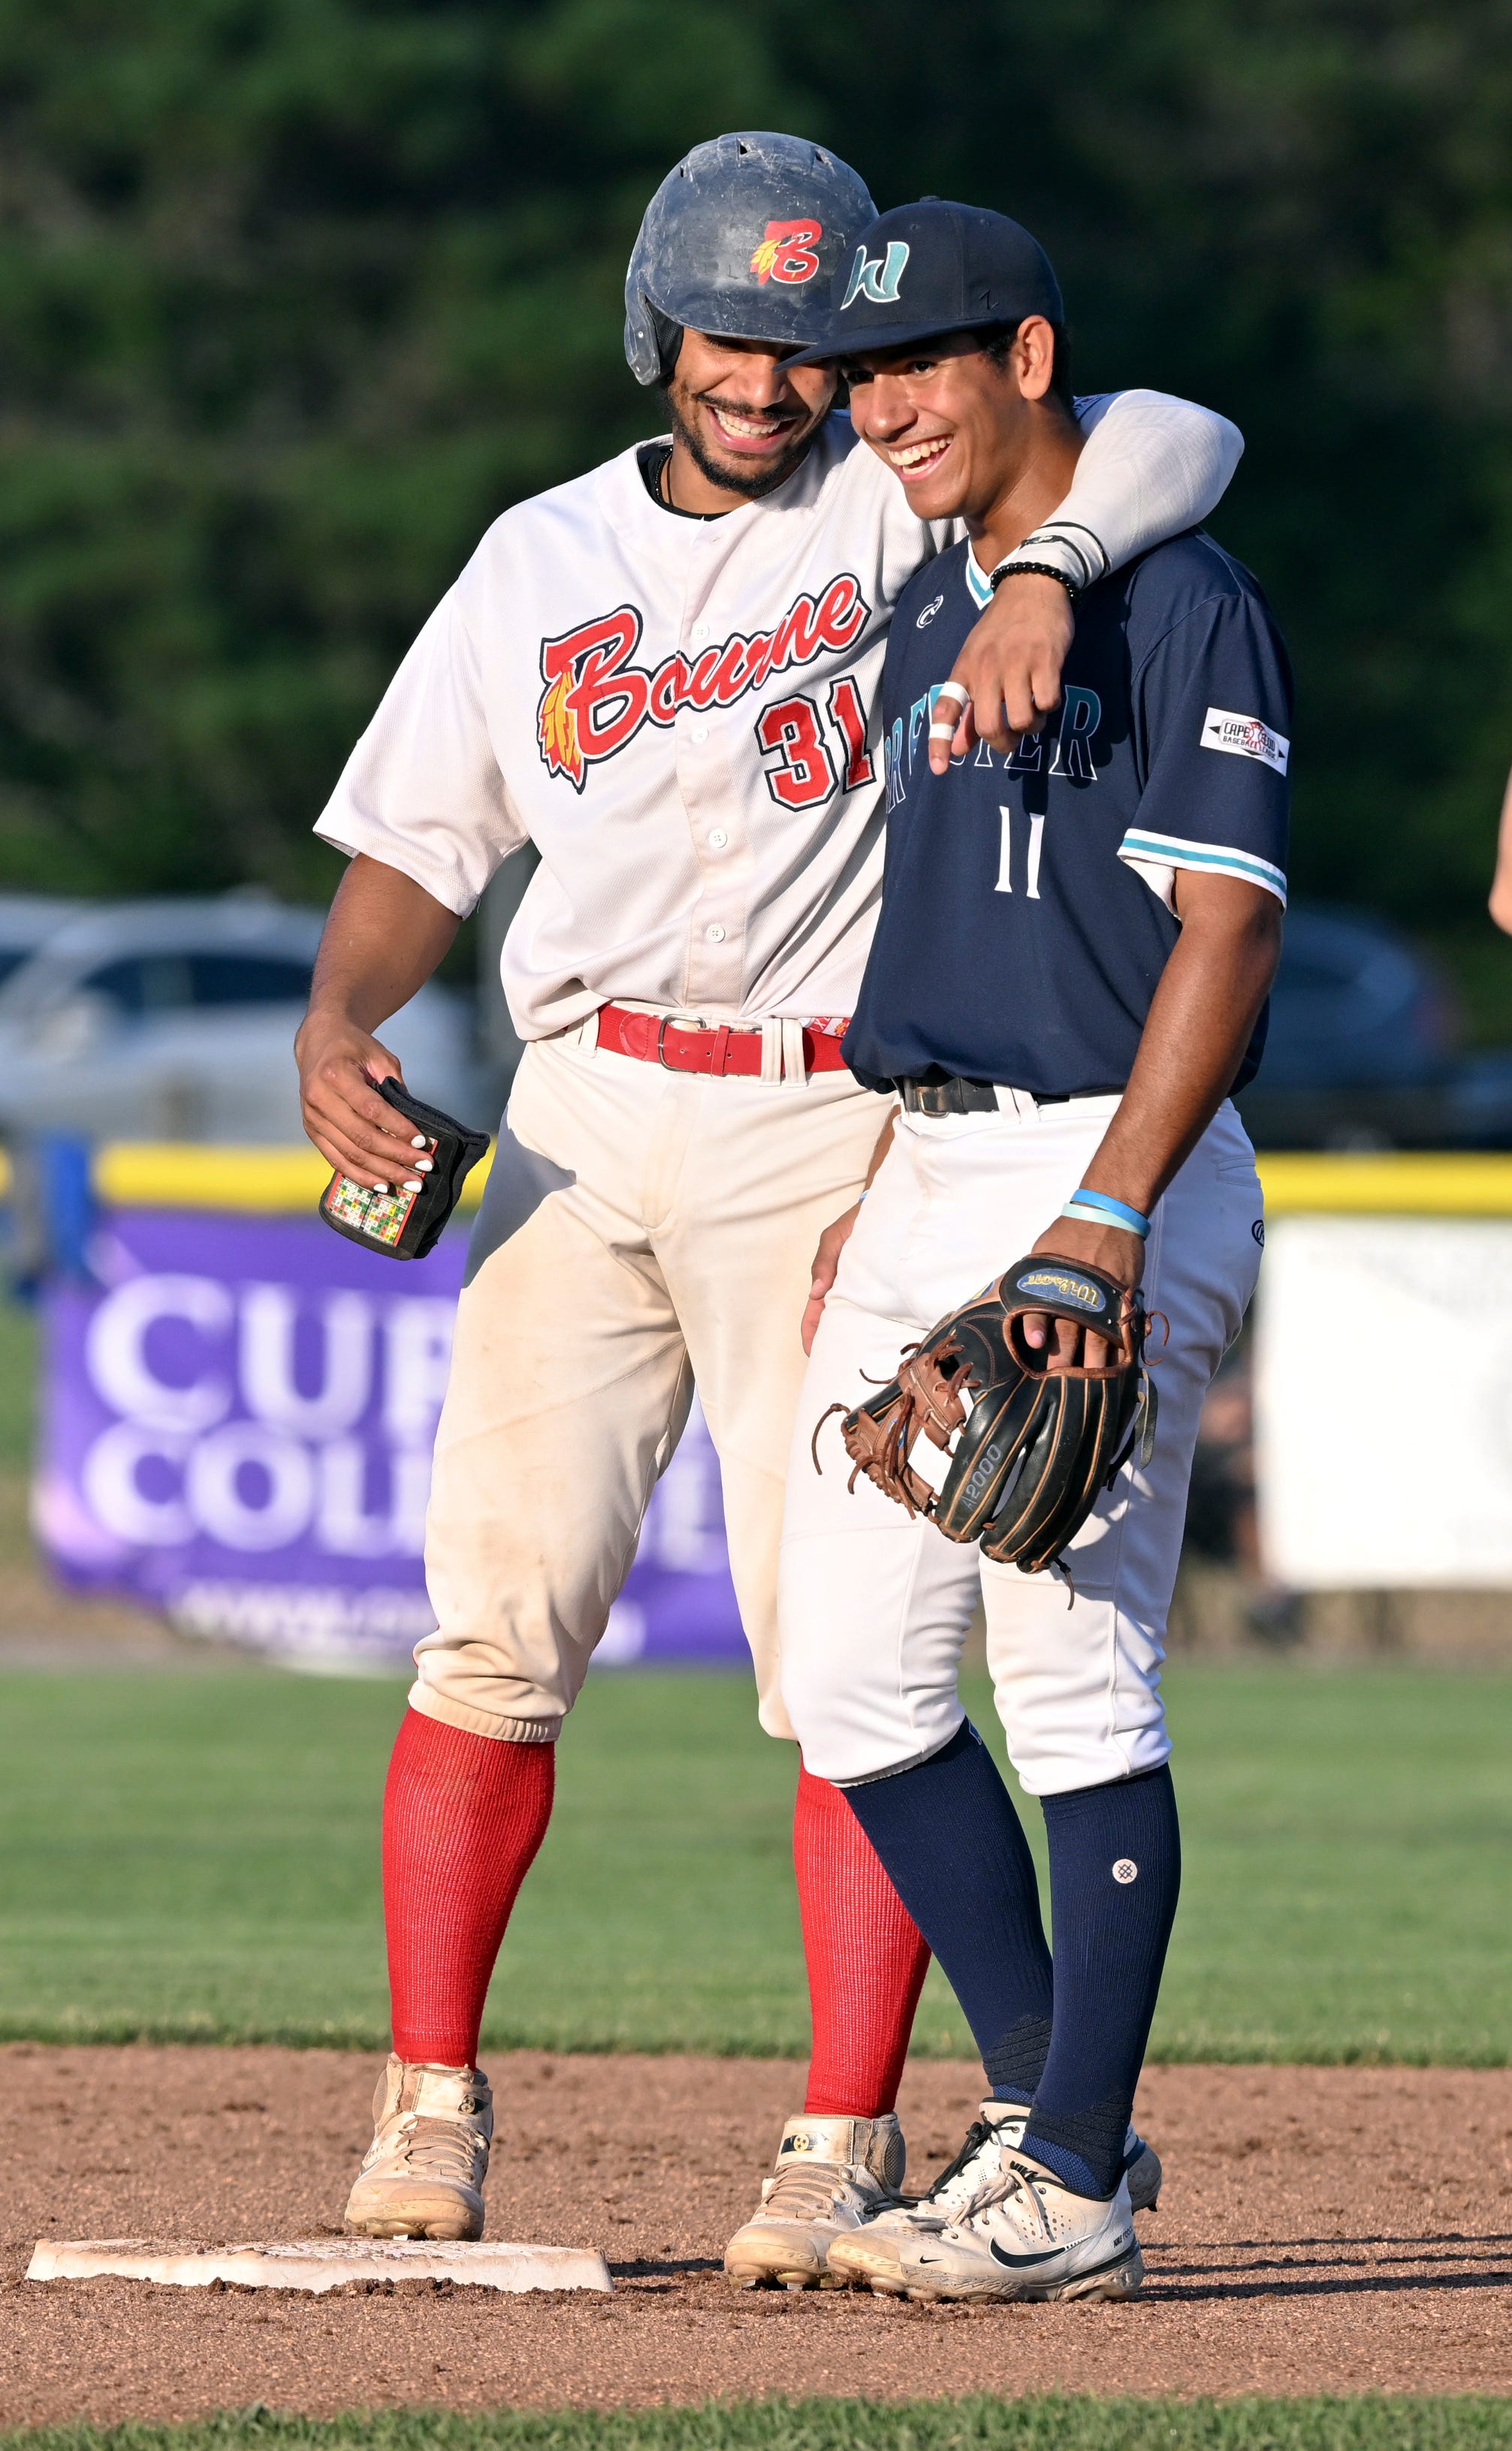 Bourne Braves one win away from Cape Cod Baseball League title